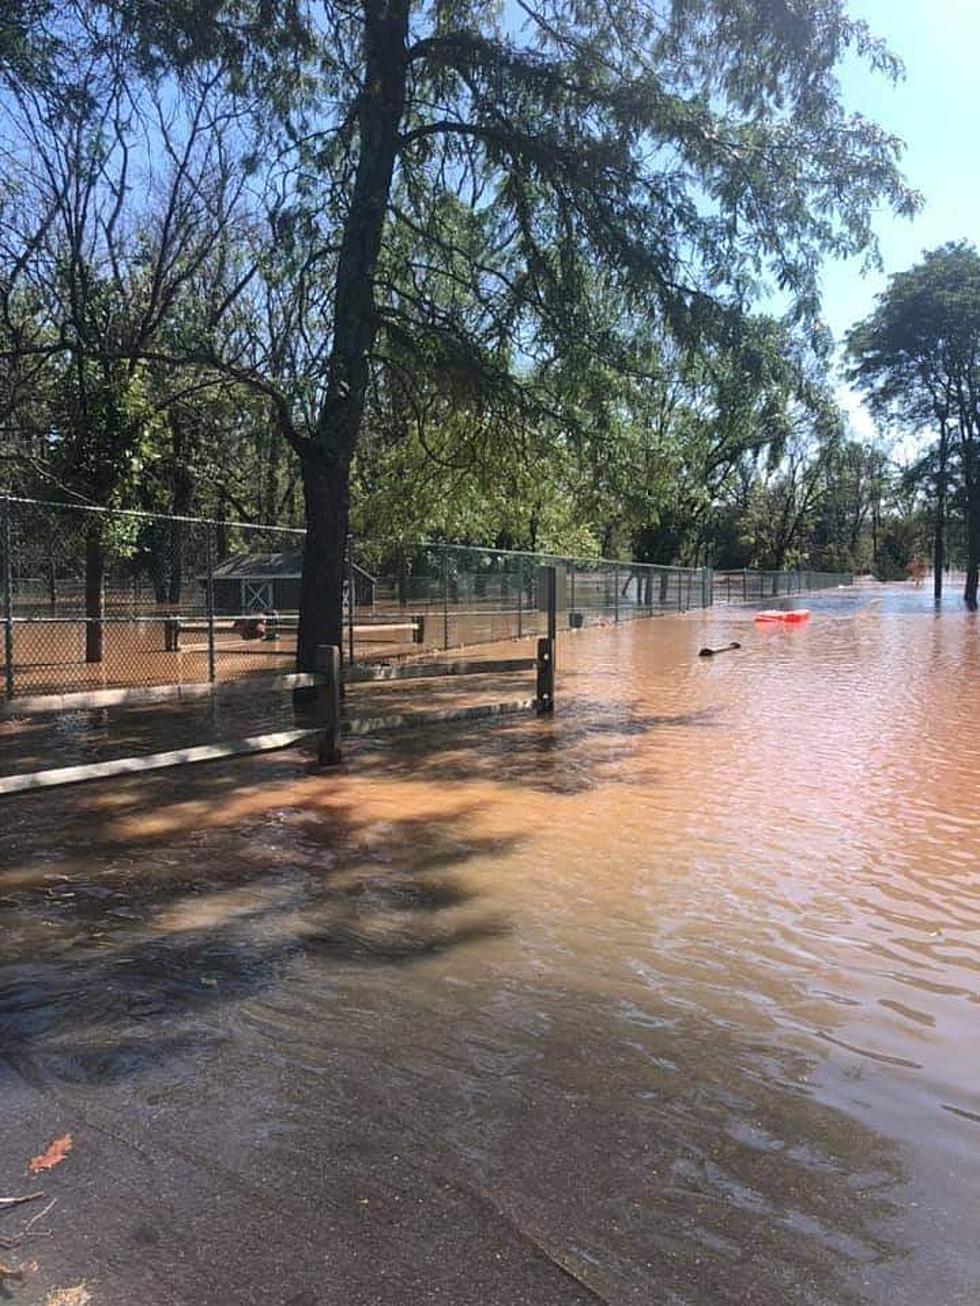 At flood-prone zoo in Piscataway, NJ, animals’ fate unclear as winter arrives